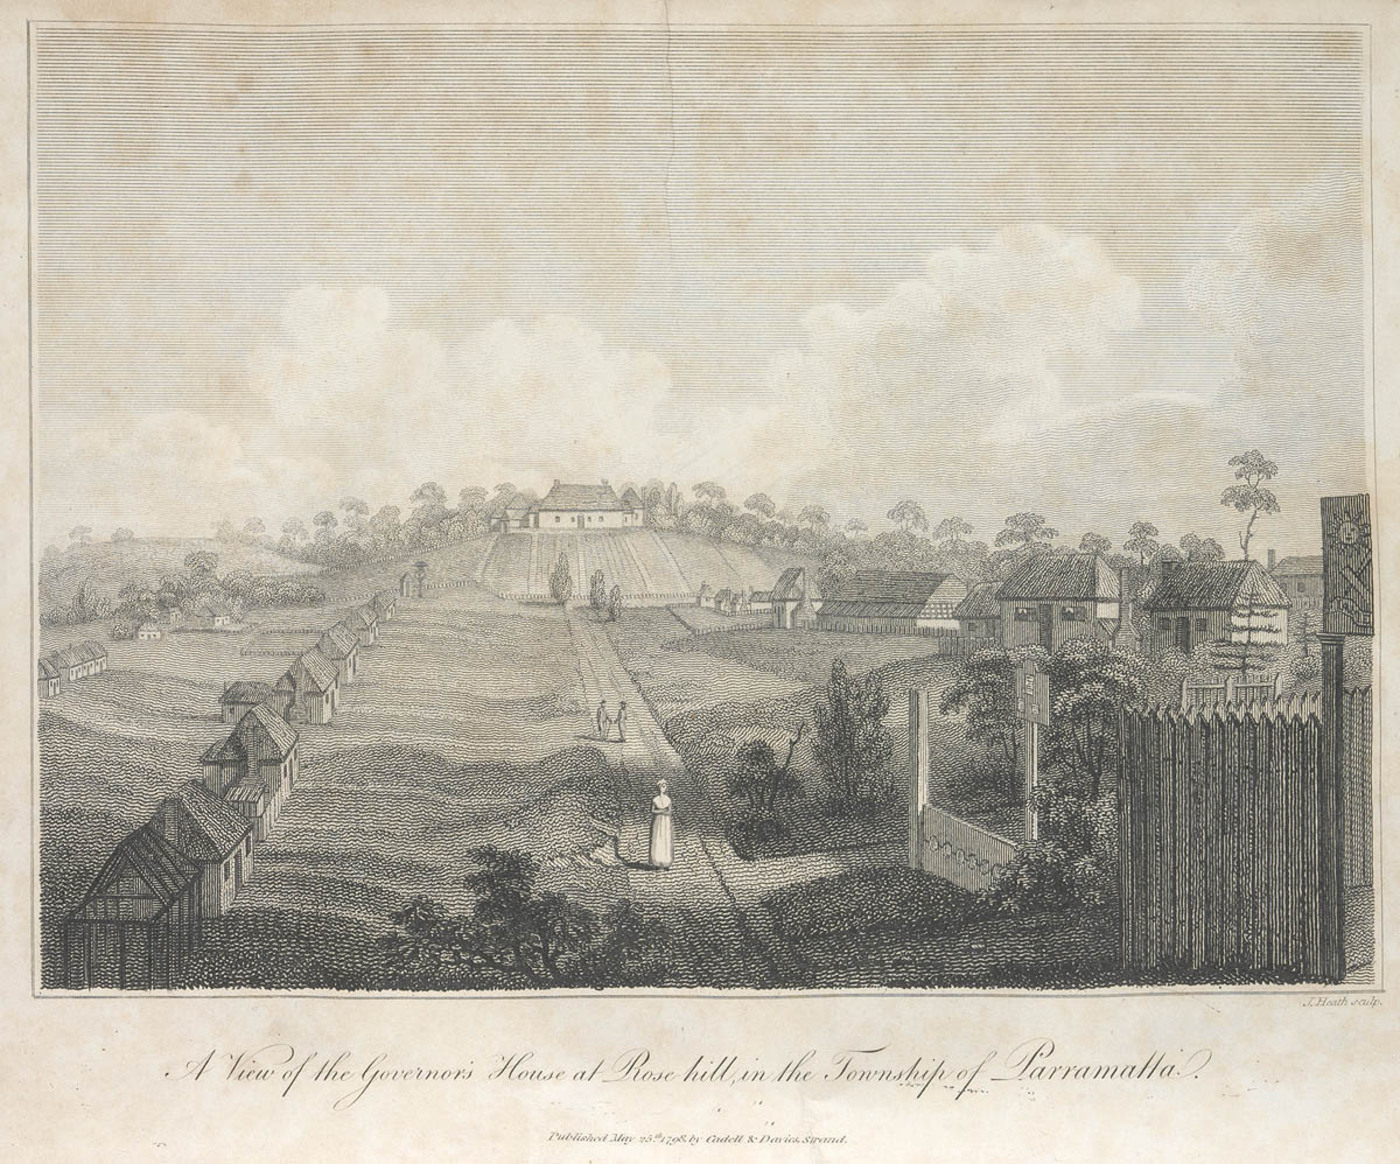 Punishment stocks are visible to the right in this view of the Governor’s house at Rose Hill in Parramatta c1798, State Library of NSW